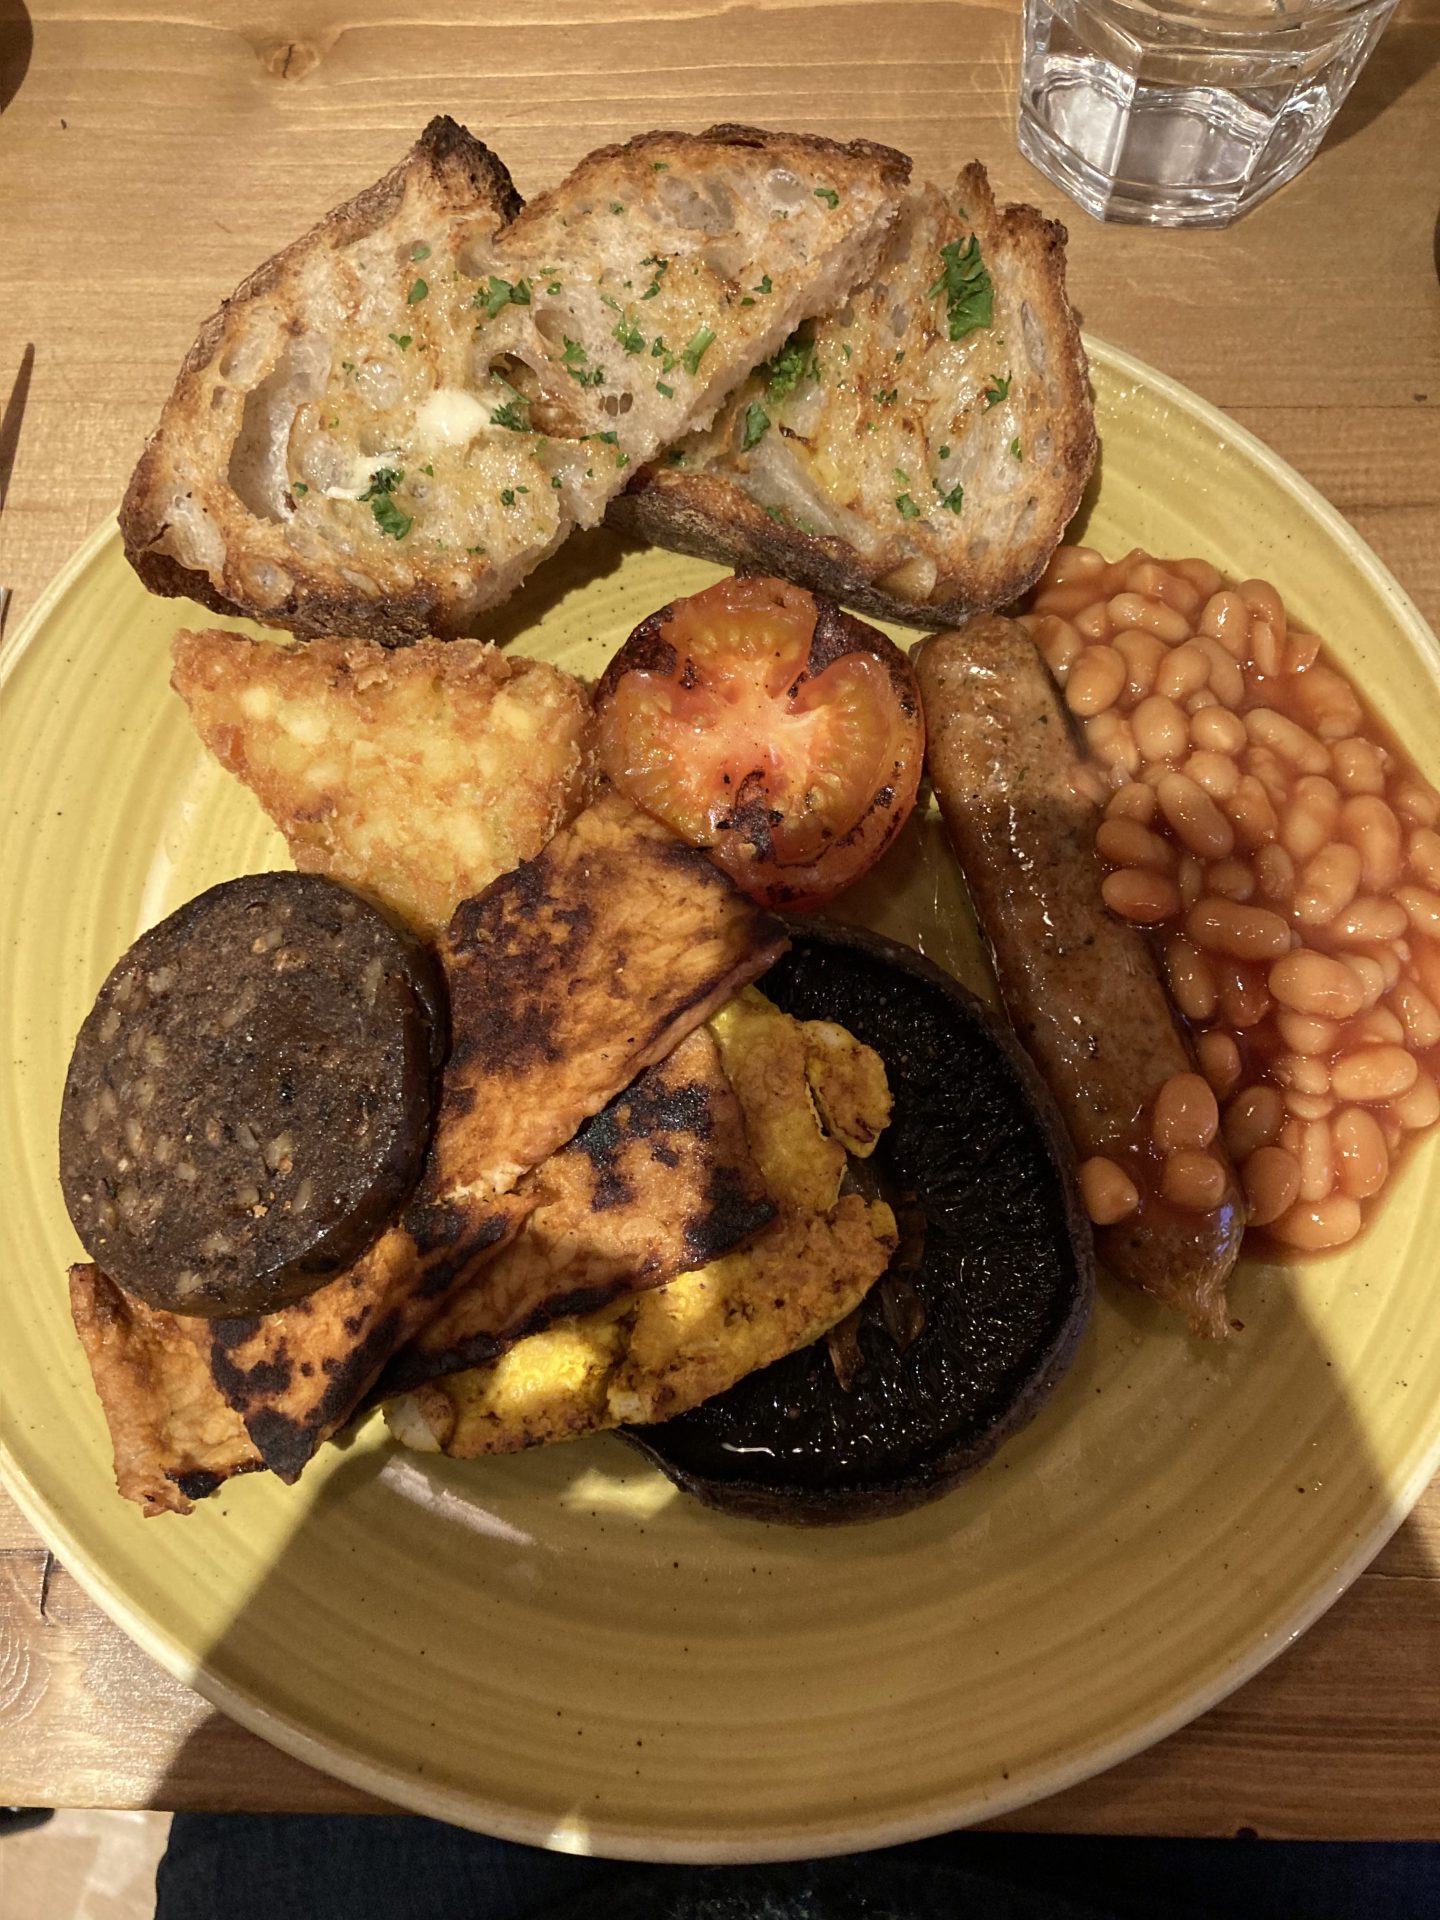 source full vegan breakfast, including grilled tempeh and tofu, beans, tomato, mushroom, hash brown, and toasted sourdough with herbs on top.